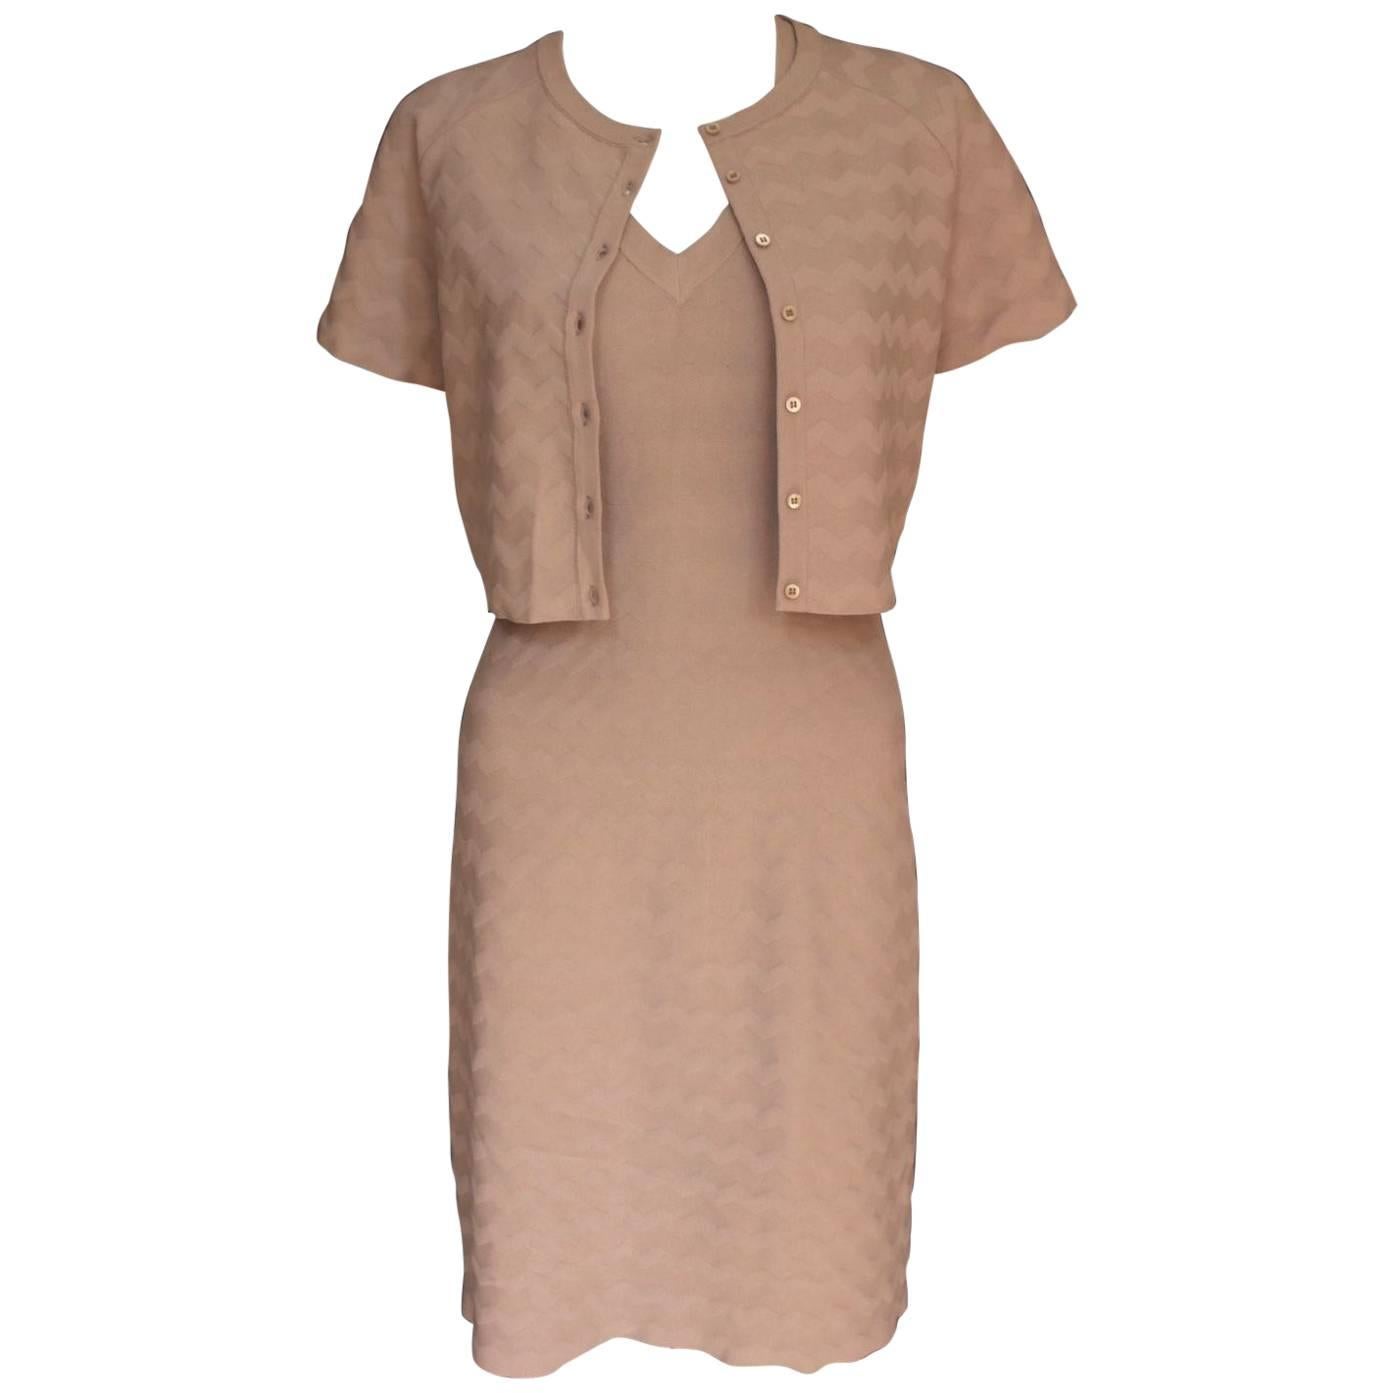 Alaia Dusky Beige Chevron Stretch Knit Dress with Matching Top  F42 uk 12  For Sale